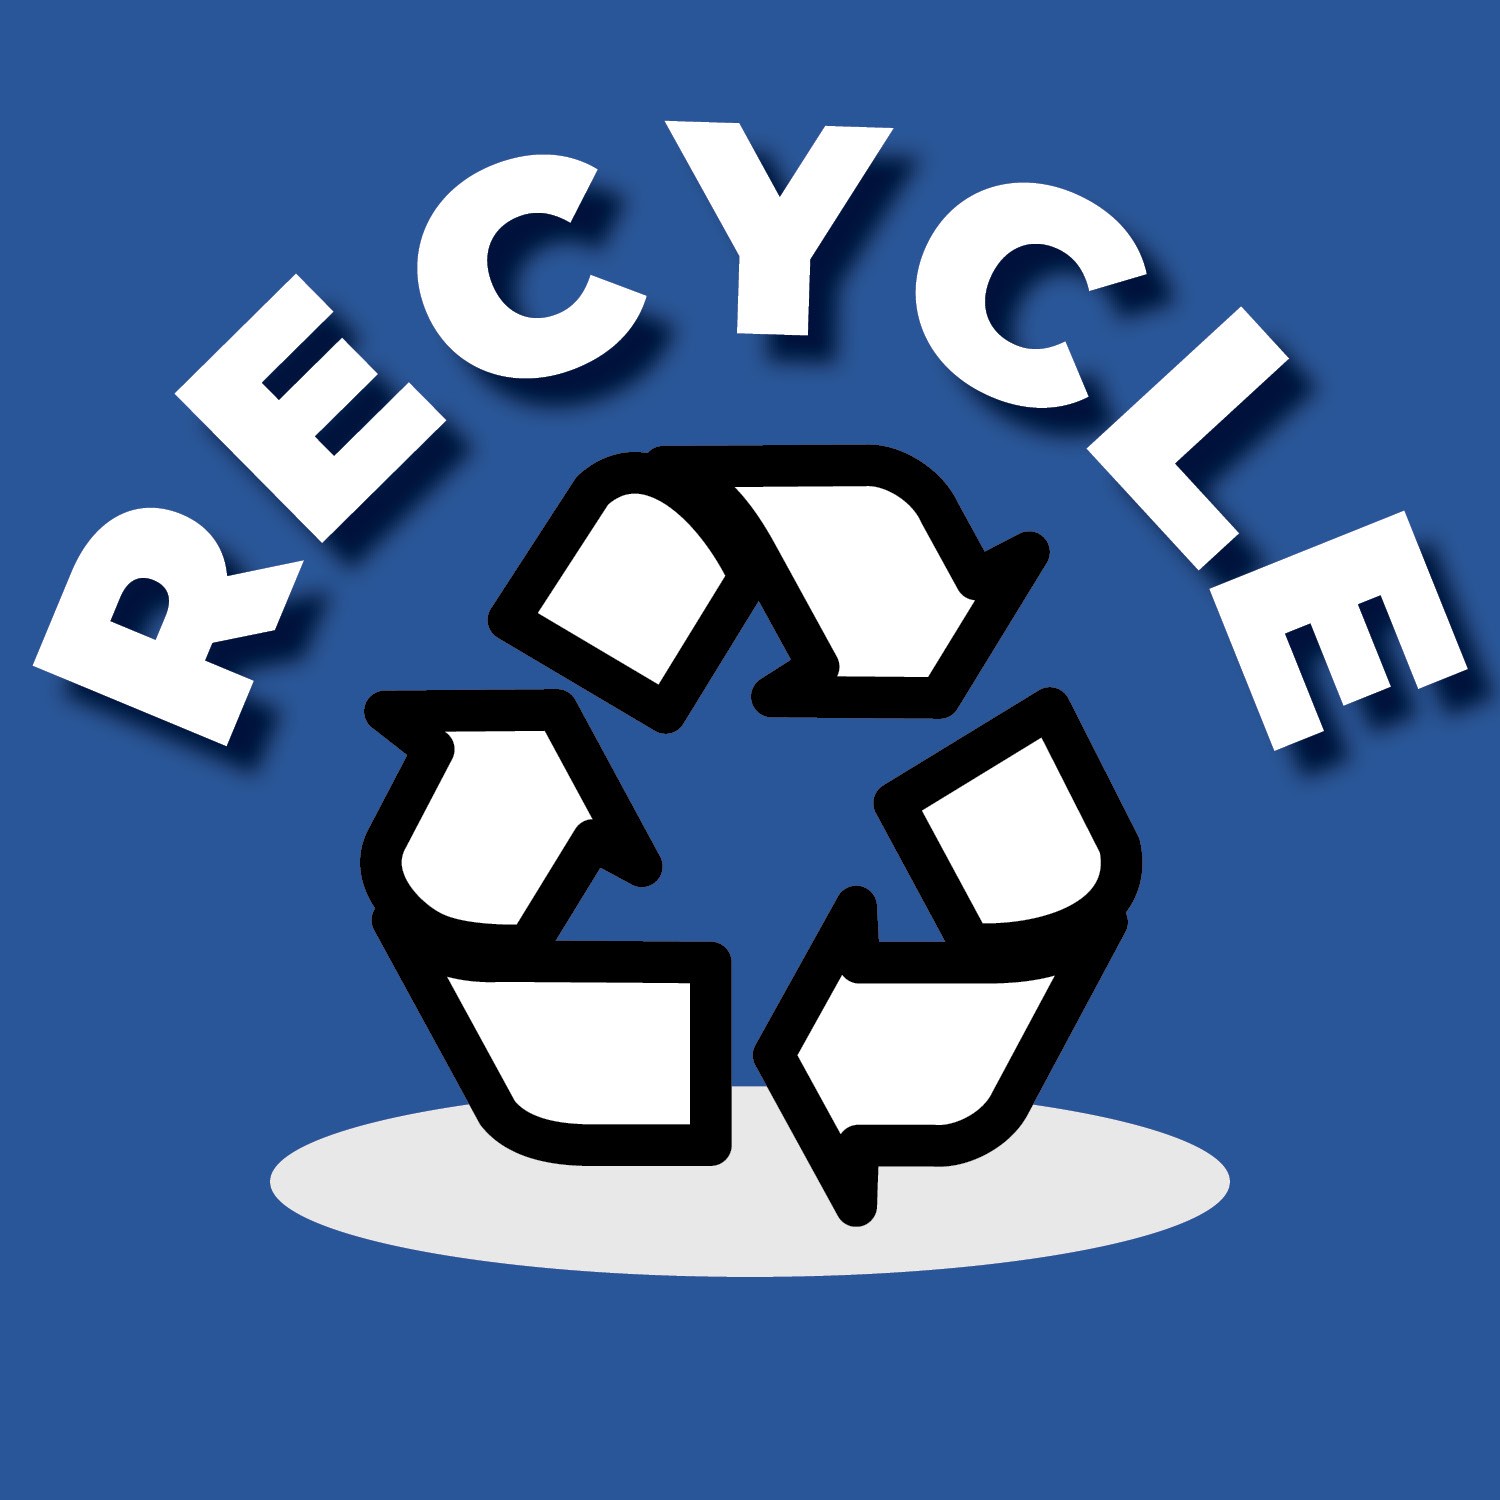 Image of the standard recycling symbol with the word "recycle" above it.